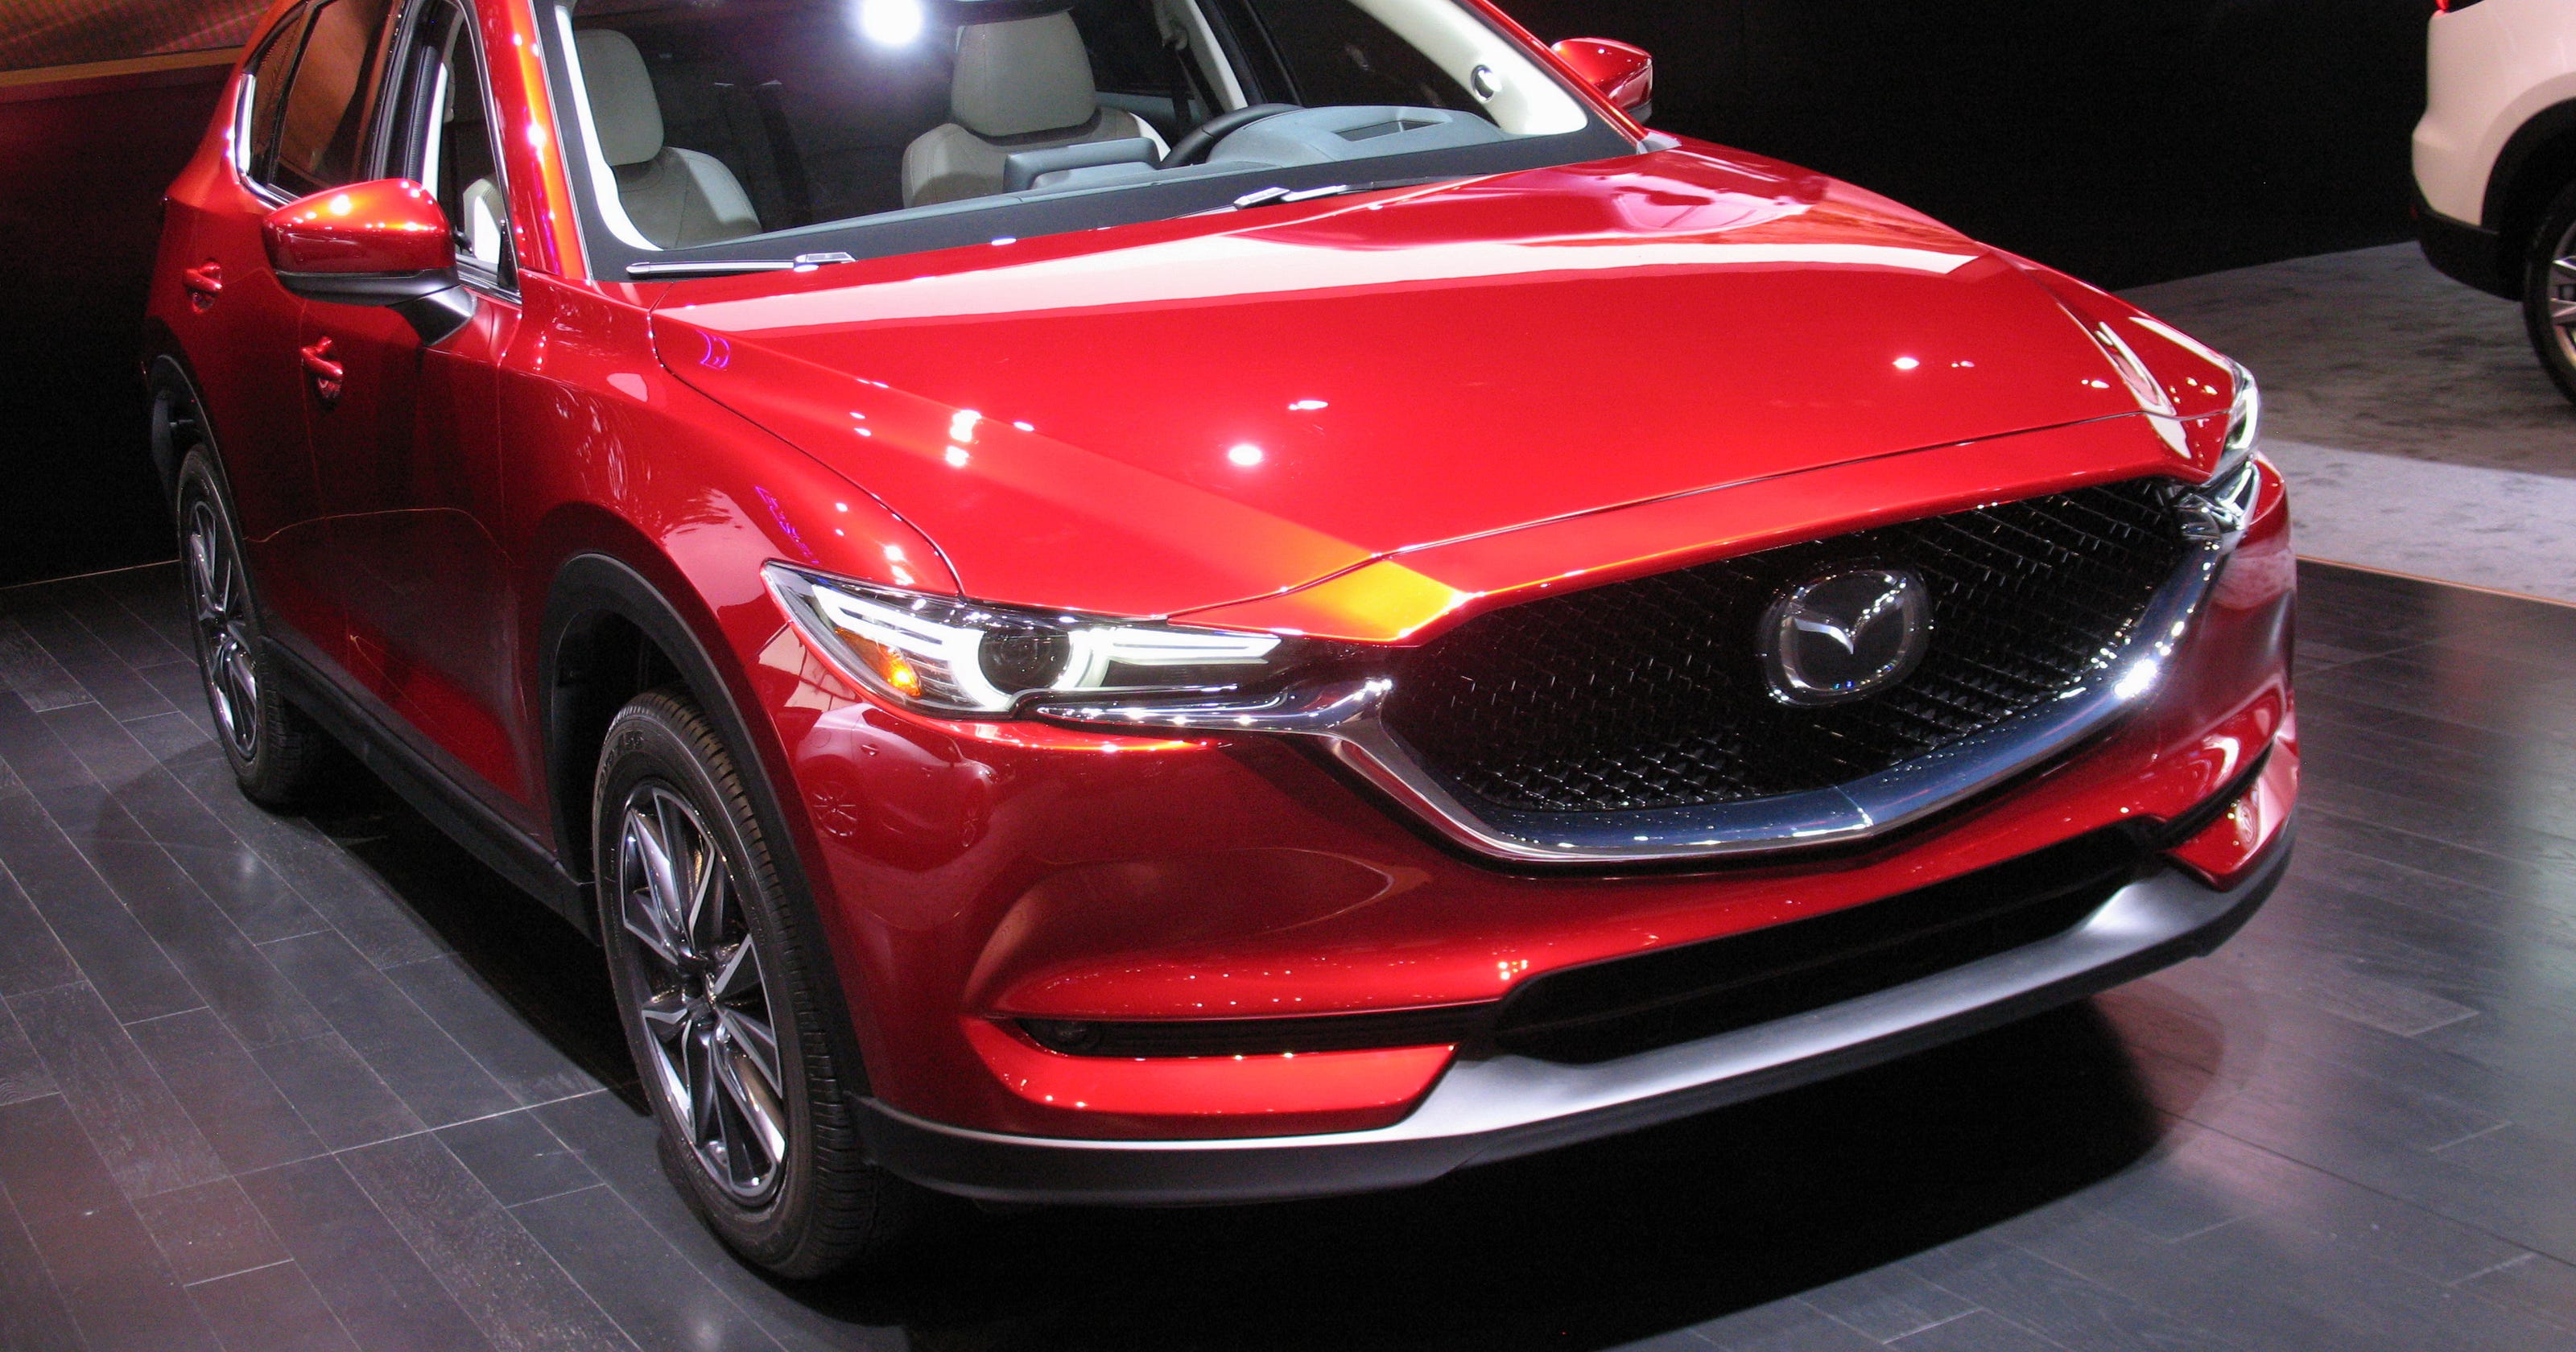 2017 Mazda CX-5 is a full-featured compact SUV